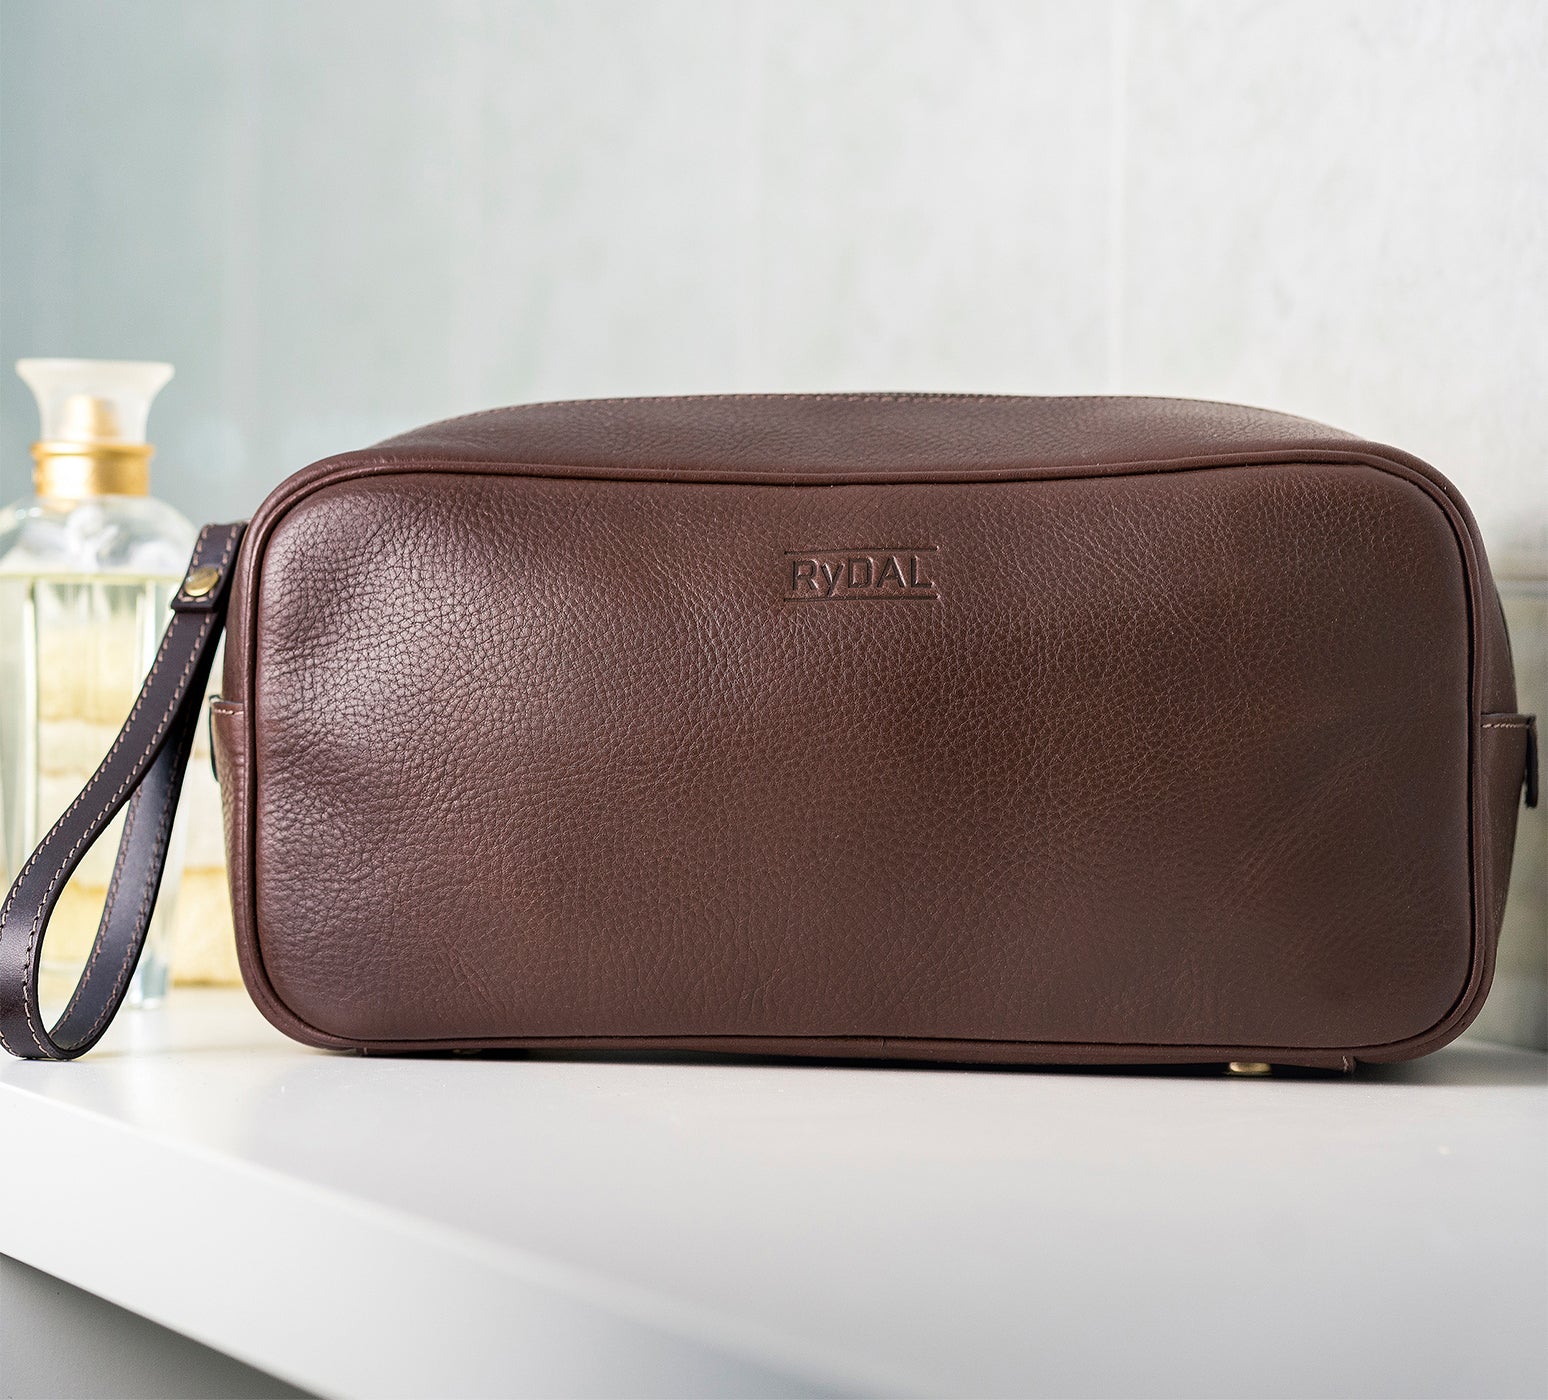 Mens Leather Wash Bag from Rydal in 'Dark Brown' in use.